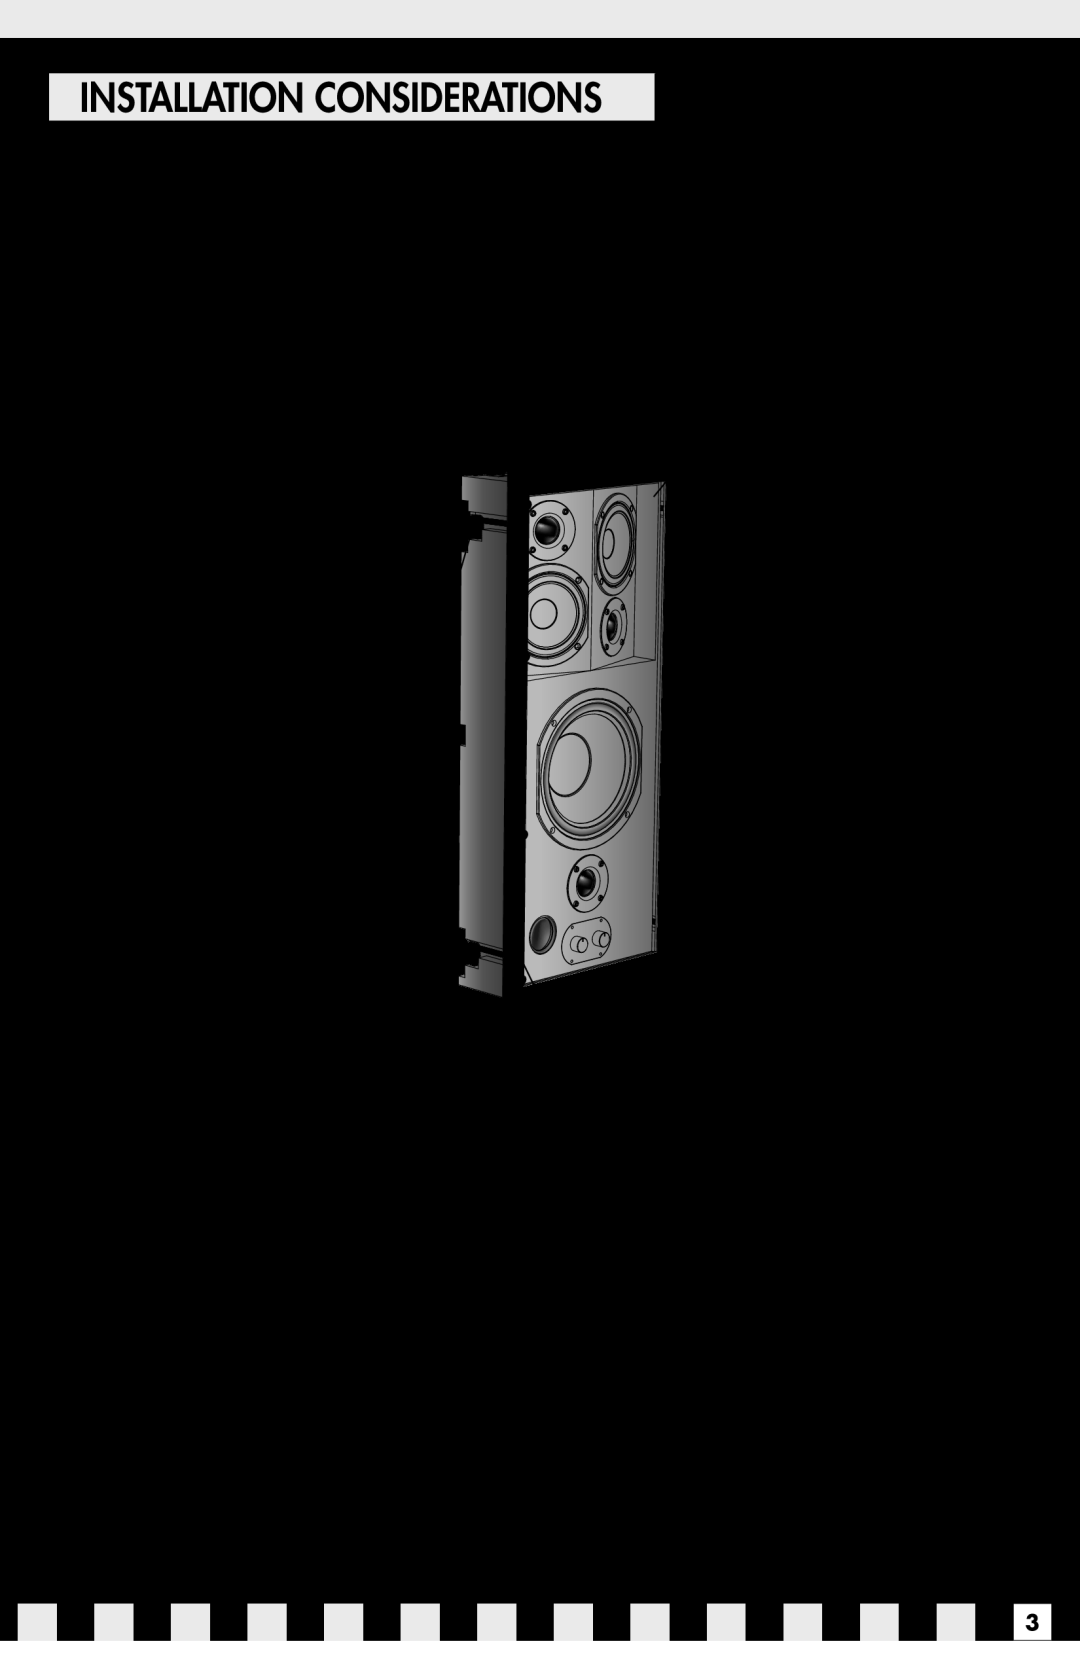 Niles Audio IW650FX, IW770FX manual Installation Considerations, Loudspeaker Bafﬂe Dogs swivel, Mounting Screws, Grille 